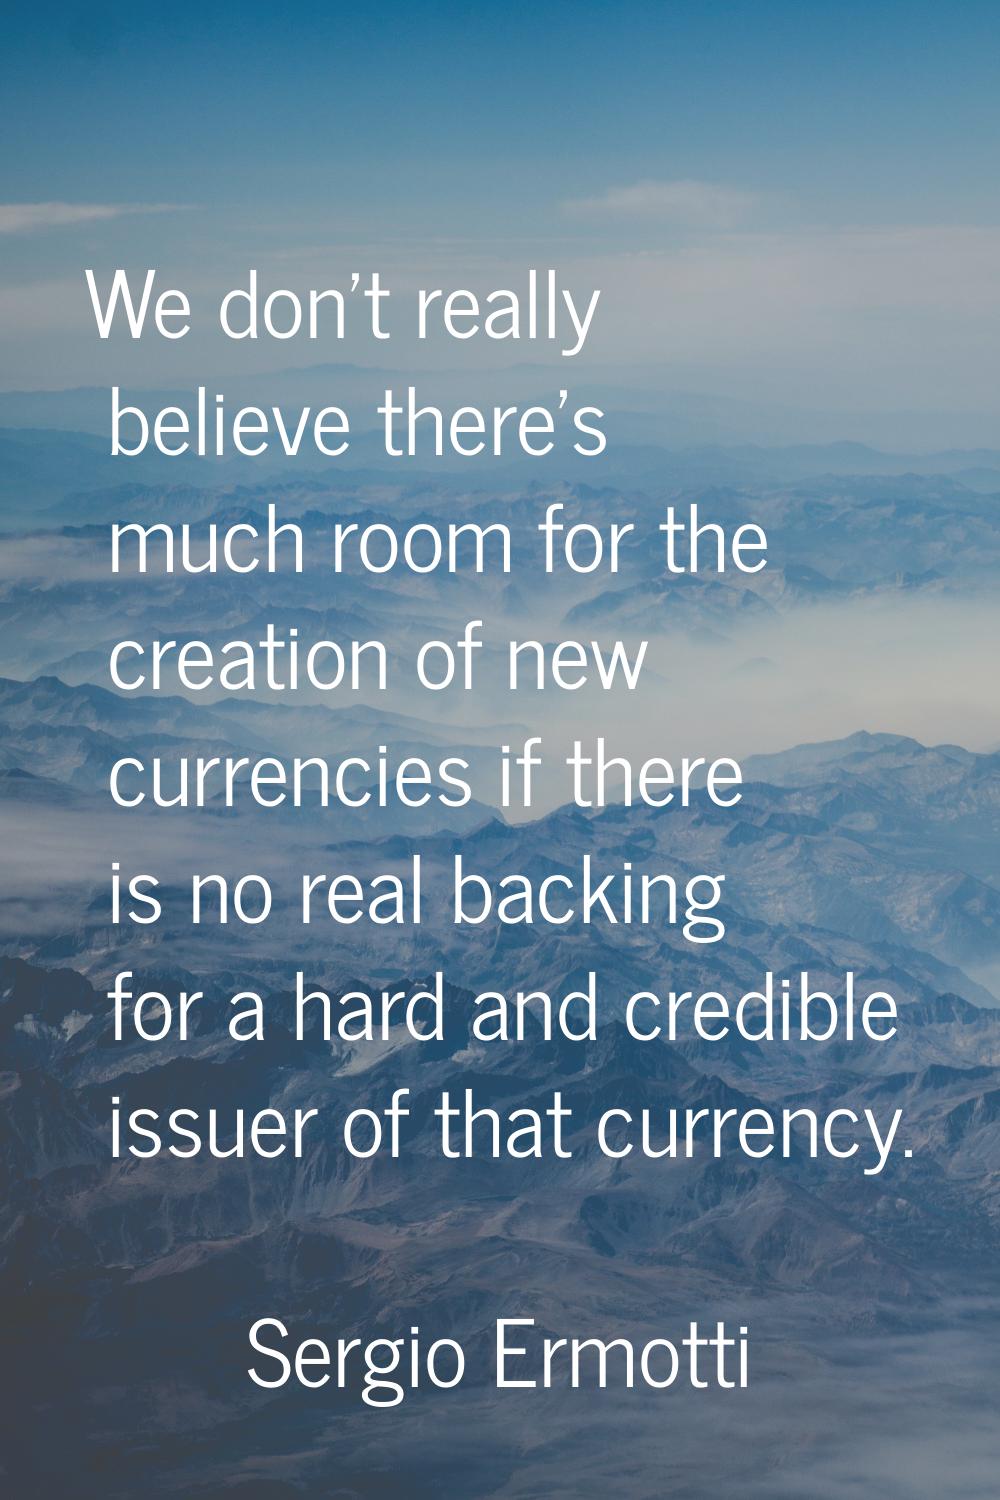 We don't really believe there's much room for the creation of new currencies if there is no real ba